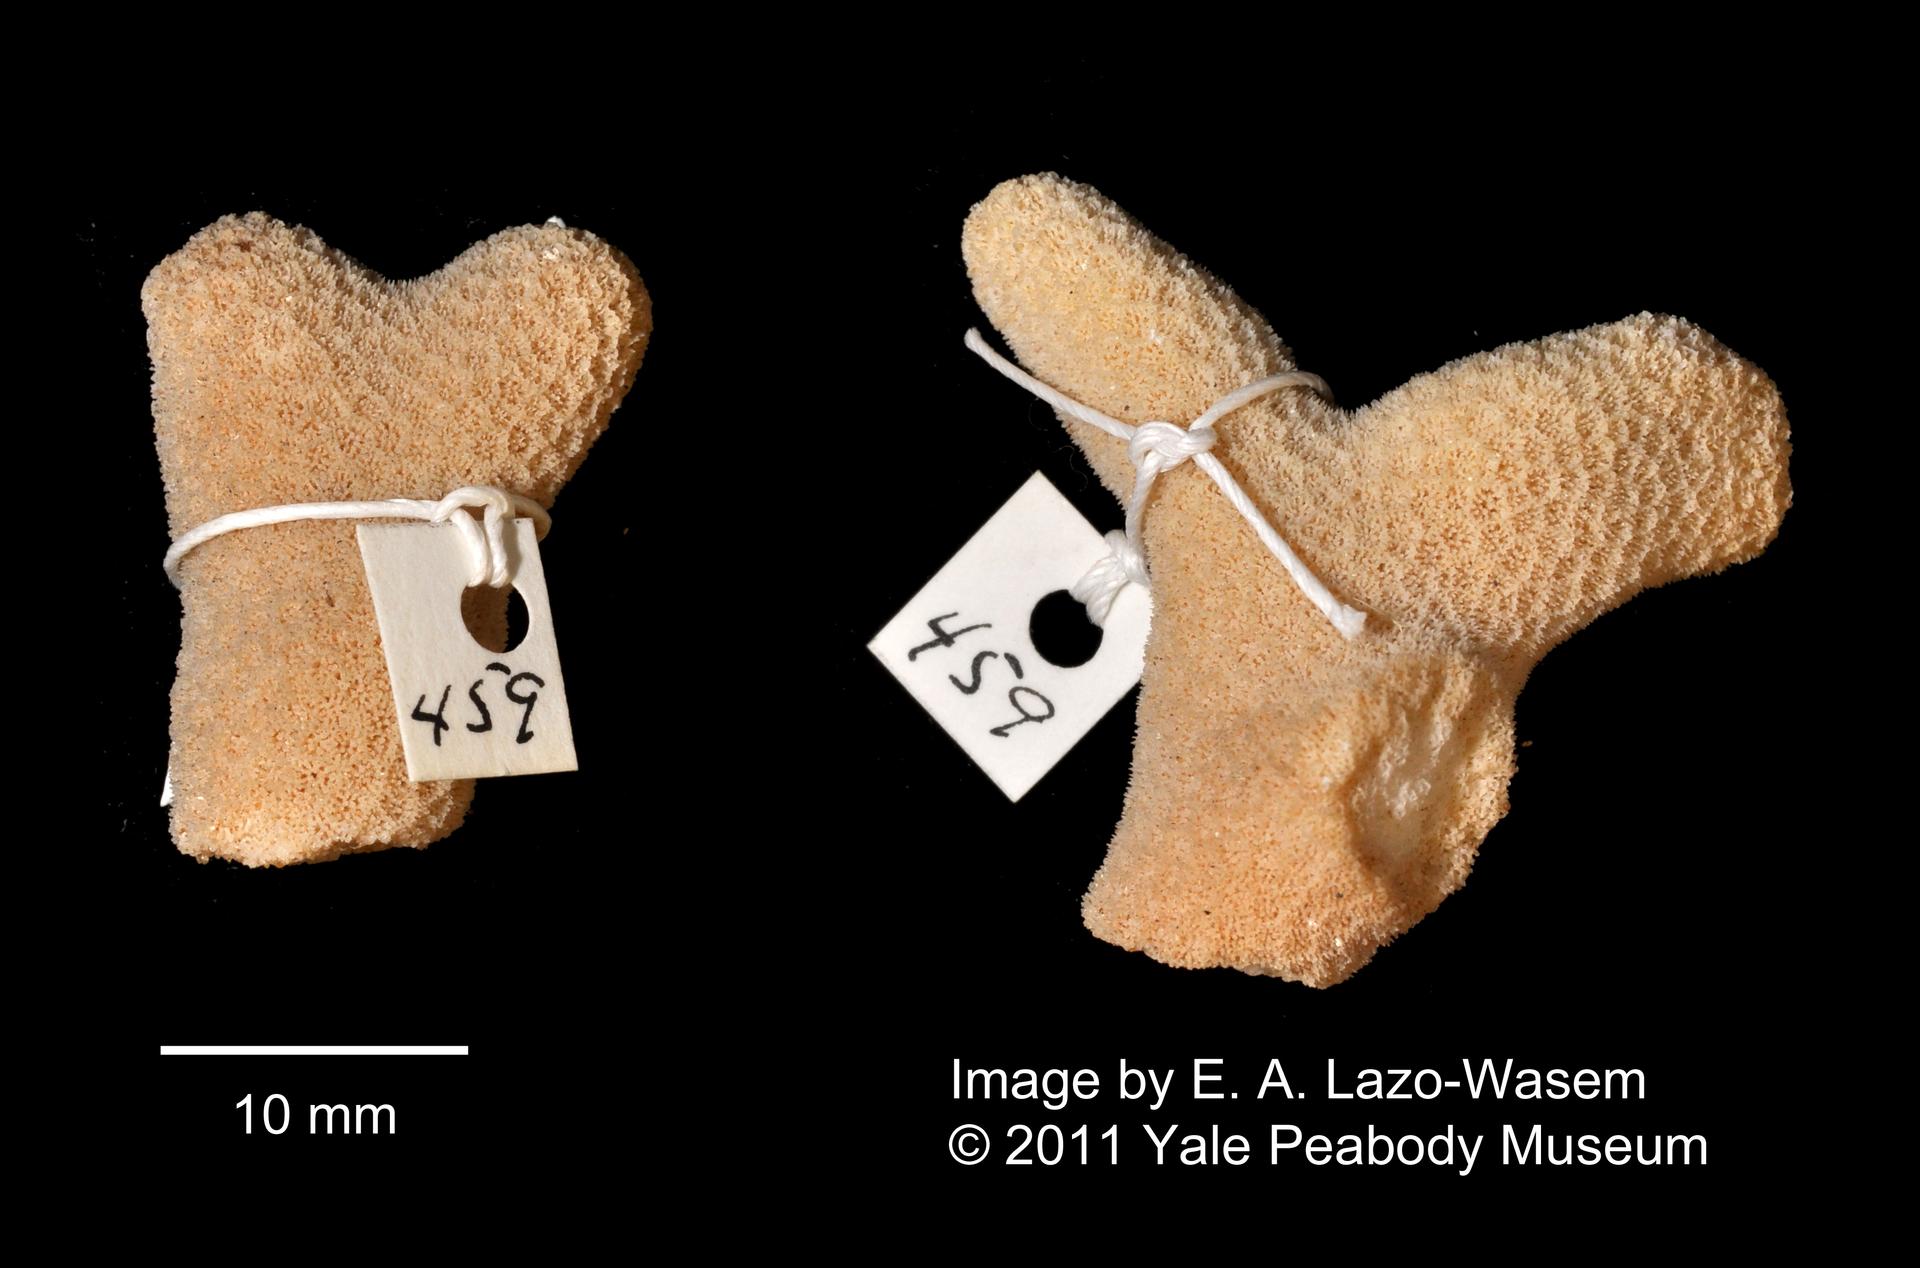 To Yale Peabody Museum of Natural History (YPM IZ 000459.CN)